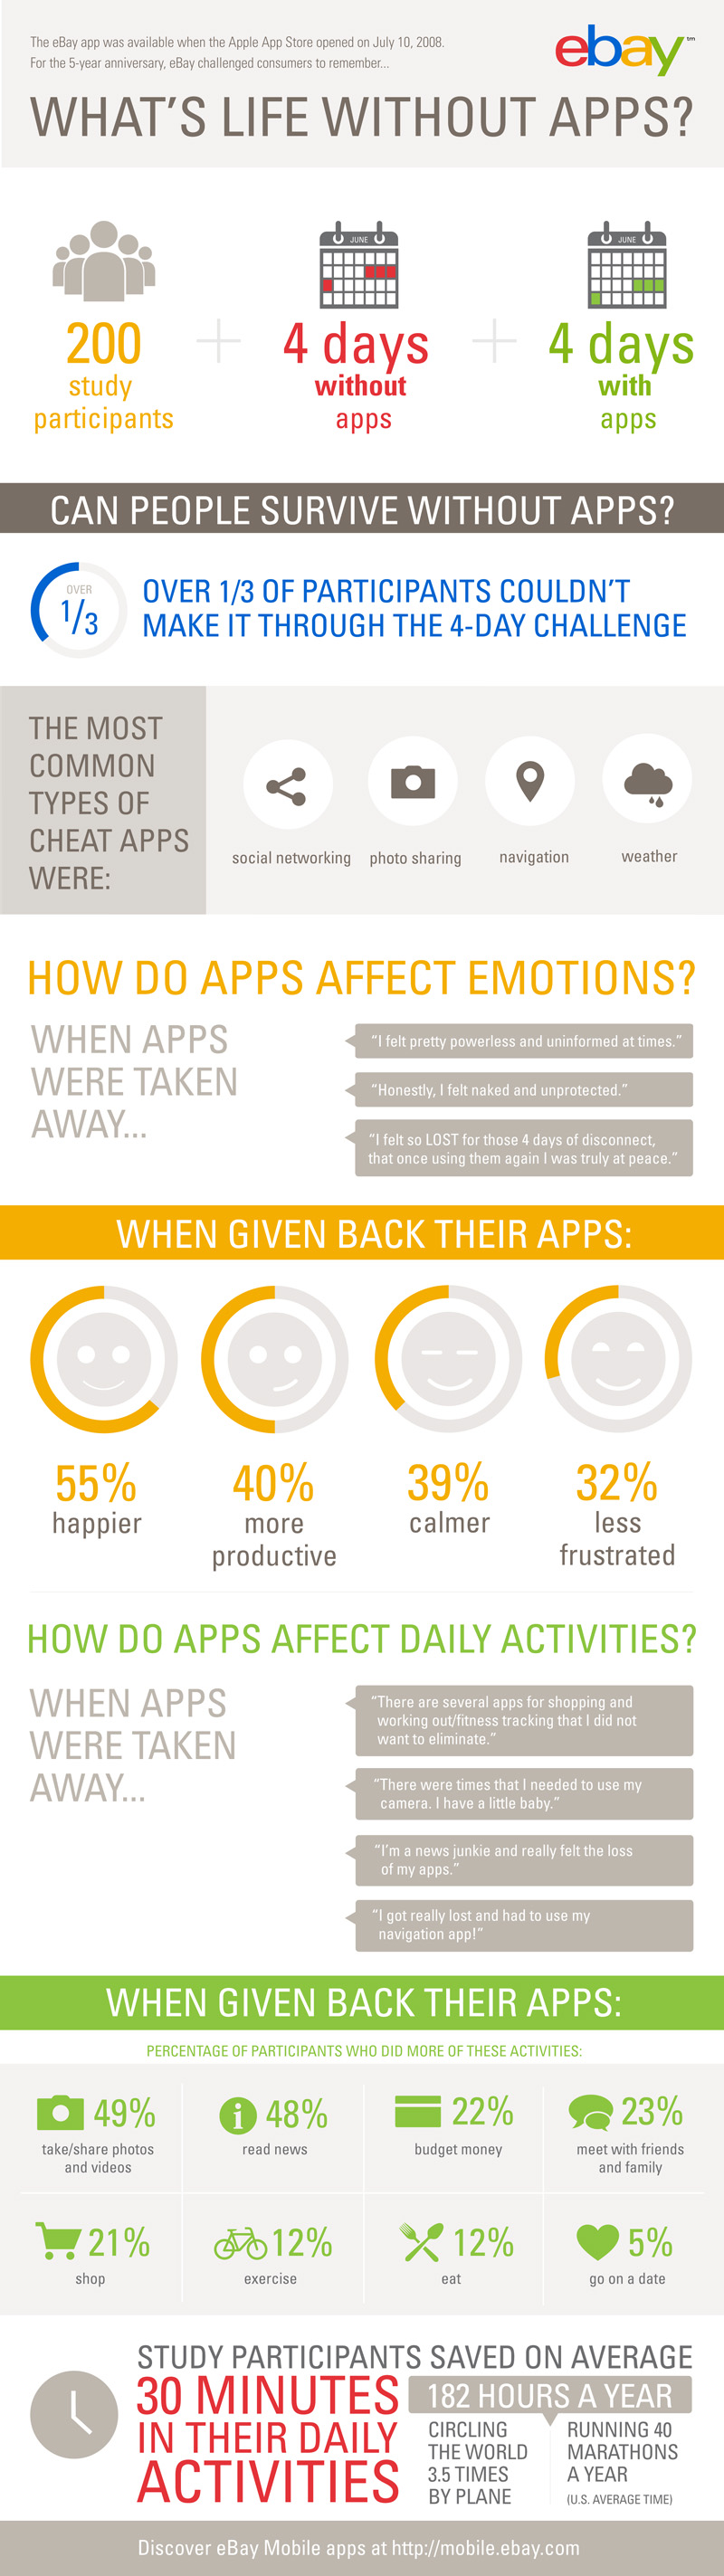 Can People Survive Without Apps? [Infographic]